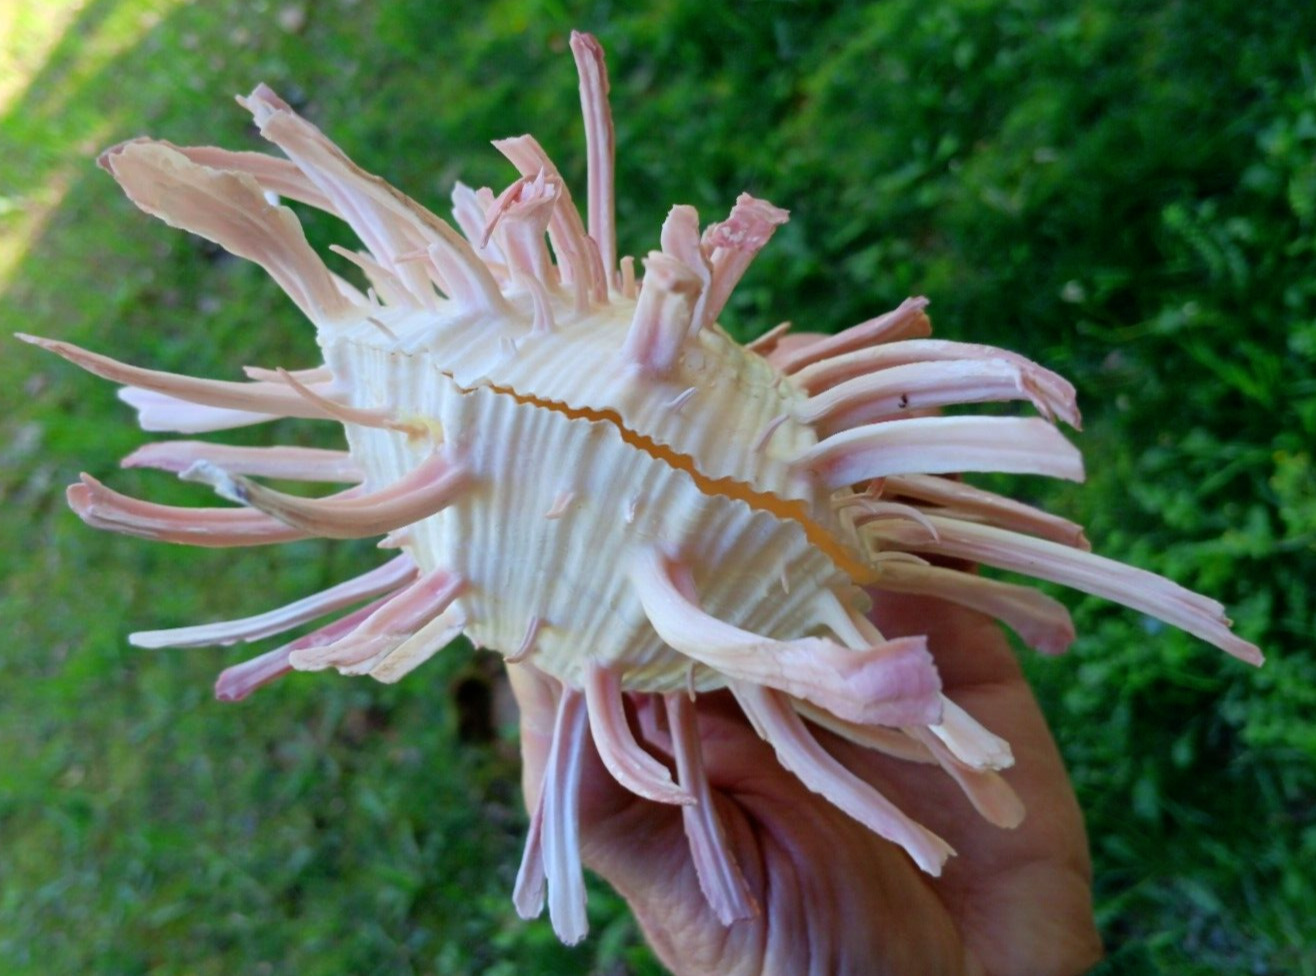 Rare Spondylus. Large white thorny oyster with long pink spines.